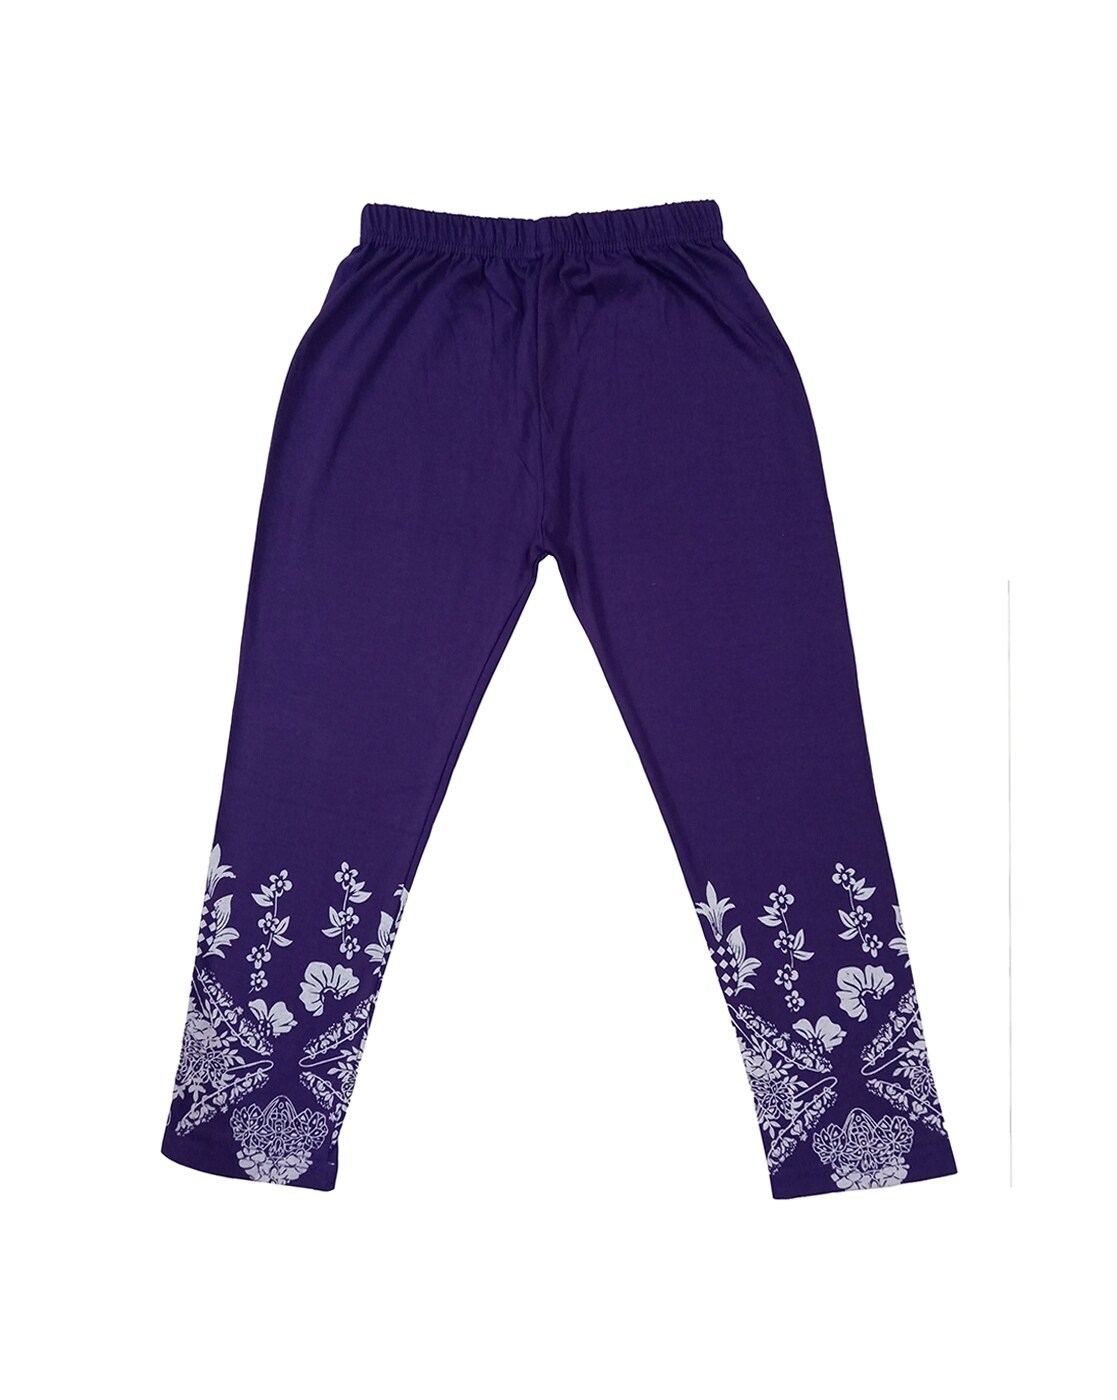 Buy Grey & Purple Trousers & Pants for Girls by INDIWEAVES Online